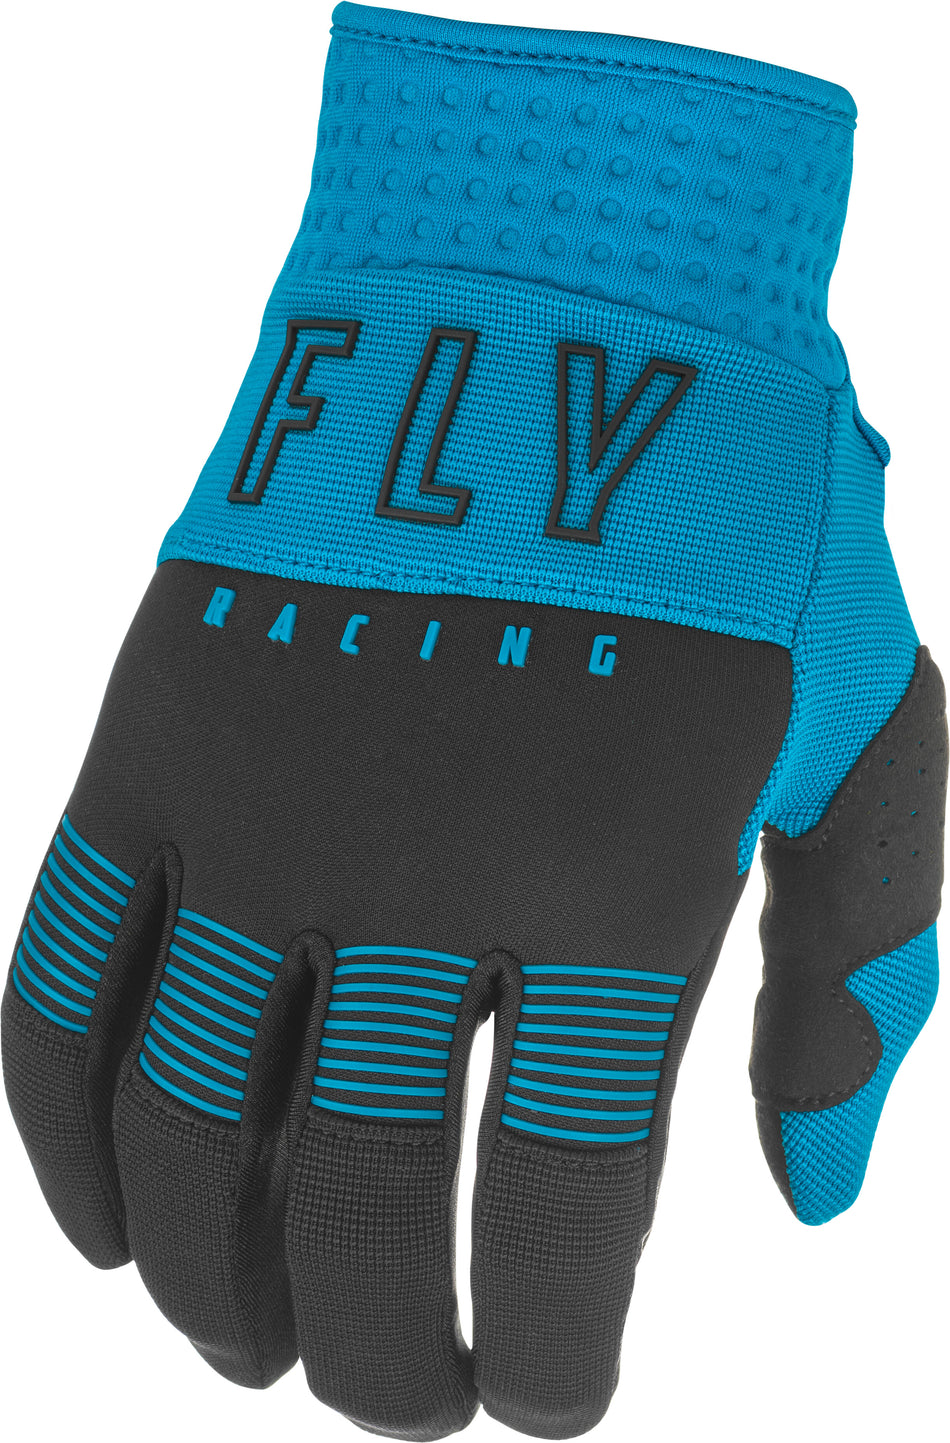 FLY RACING Youth F-16 Gloves Blue/Black Sz 01 374-91101